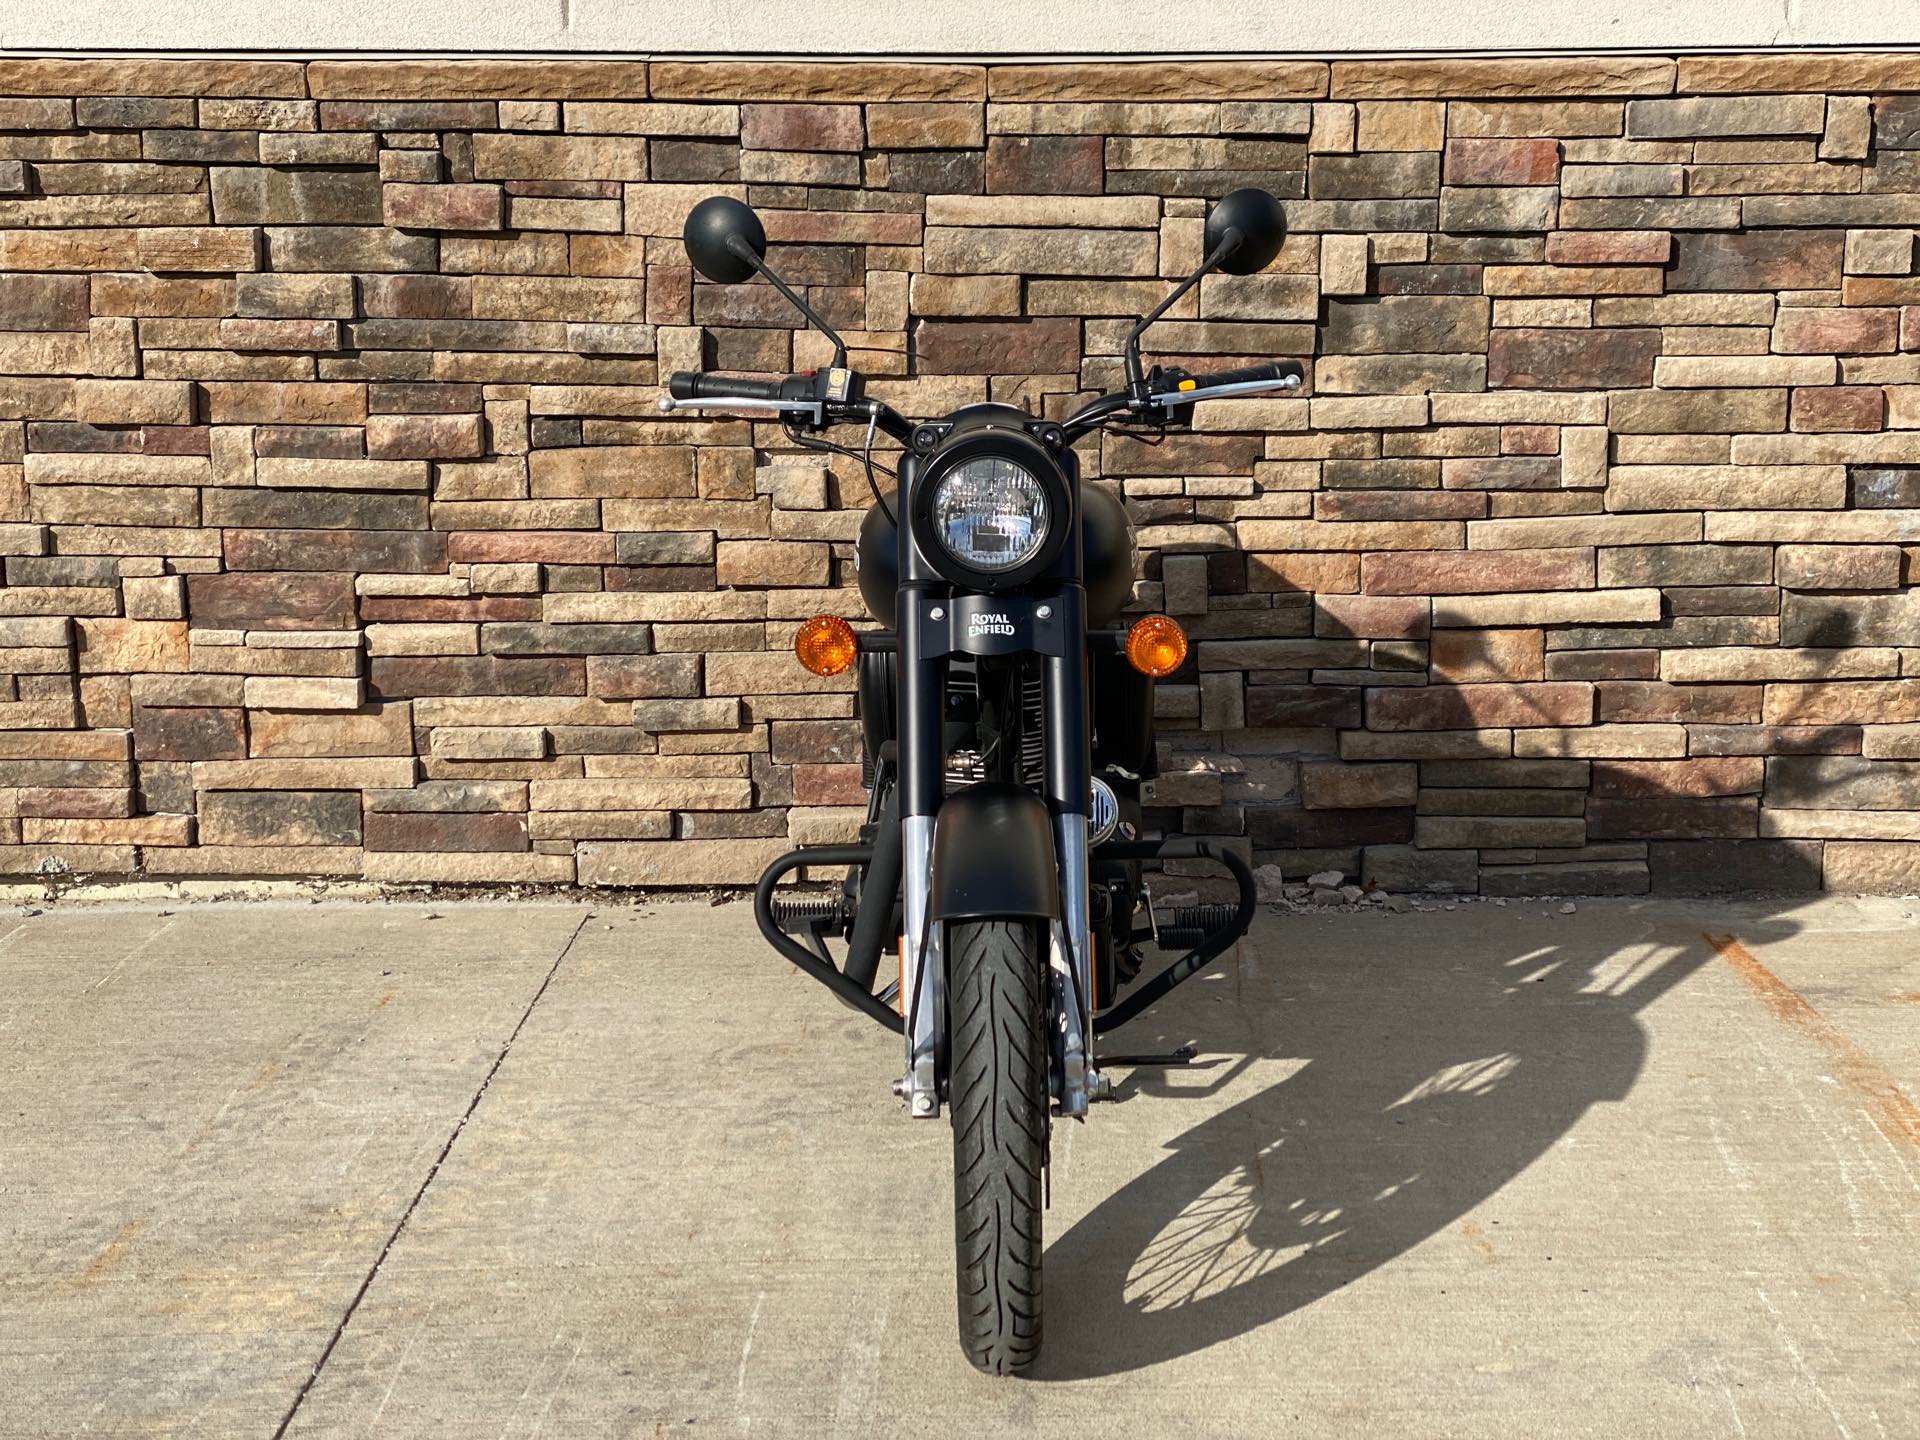 2018 Royal Enfield Classic Stealth Black at Head Indian Motorcycle